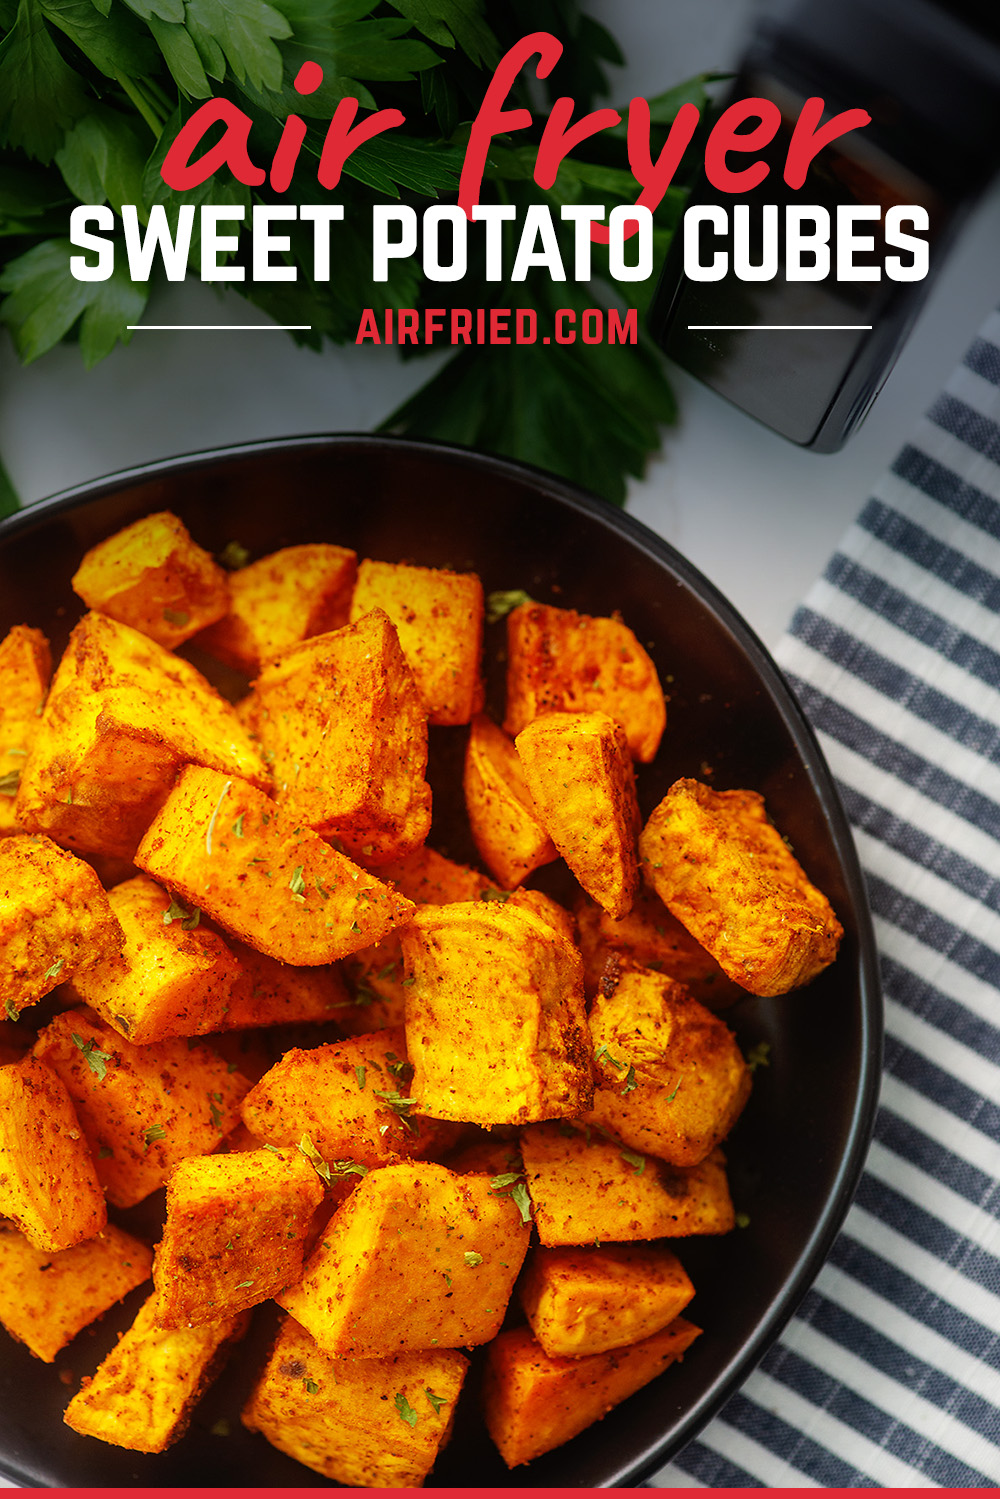 Overhead view of sweet potato cubes on a small black plate